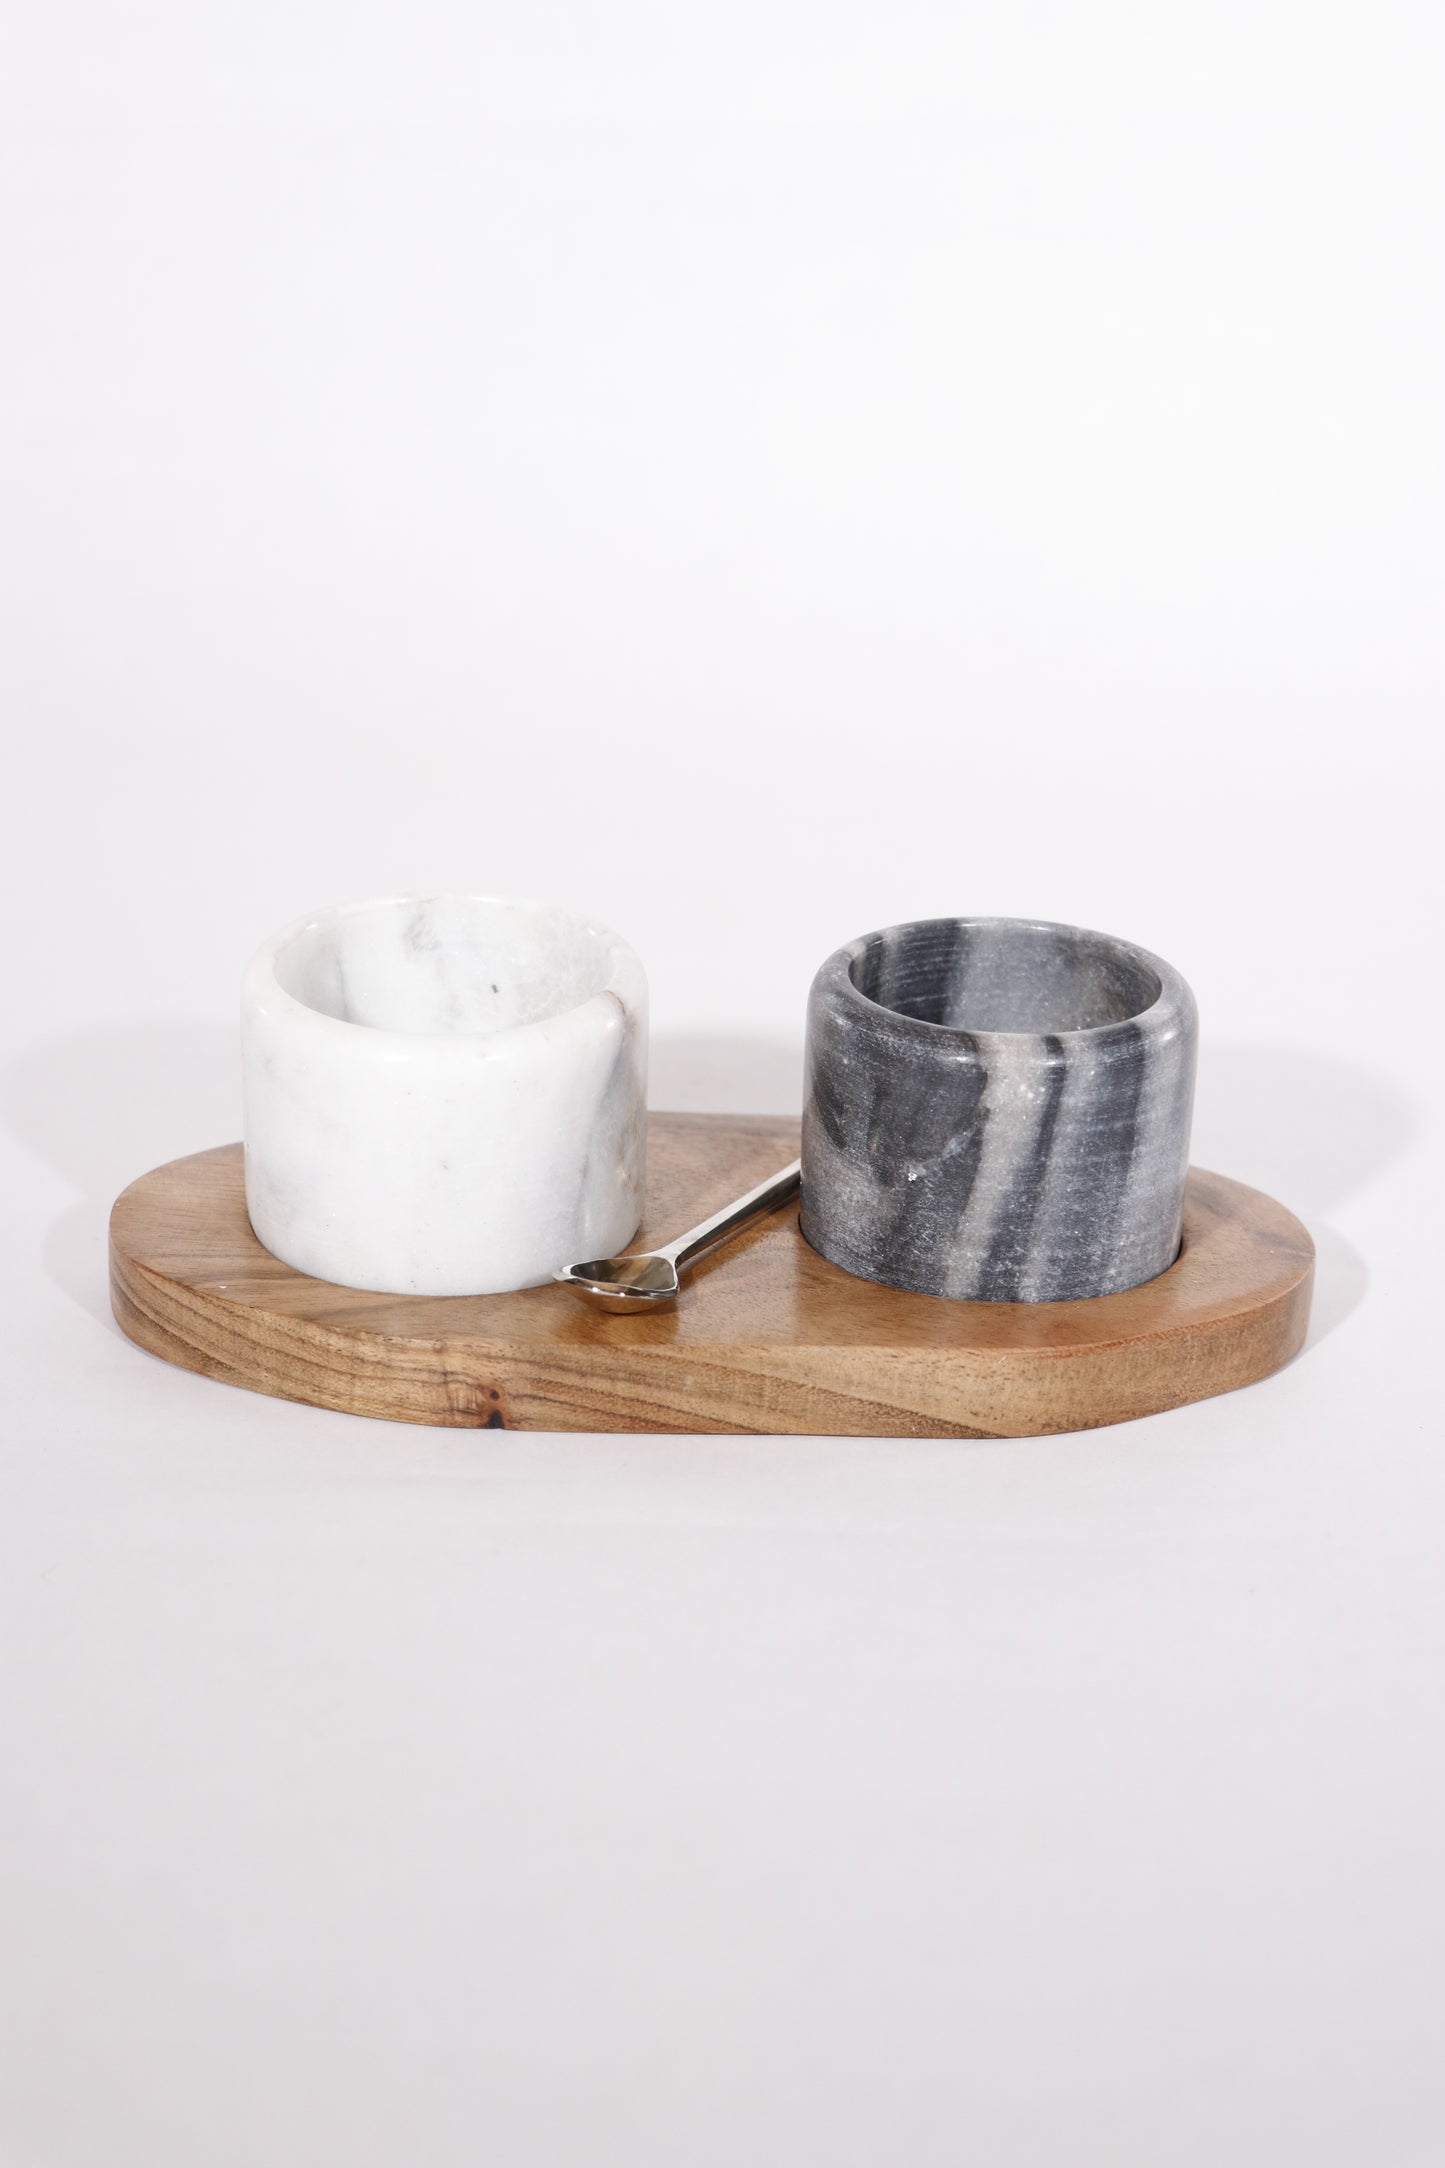 Marble and Acacia Wood Salt and Pepper Pinch Pots, Black and White, Set of 2